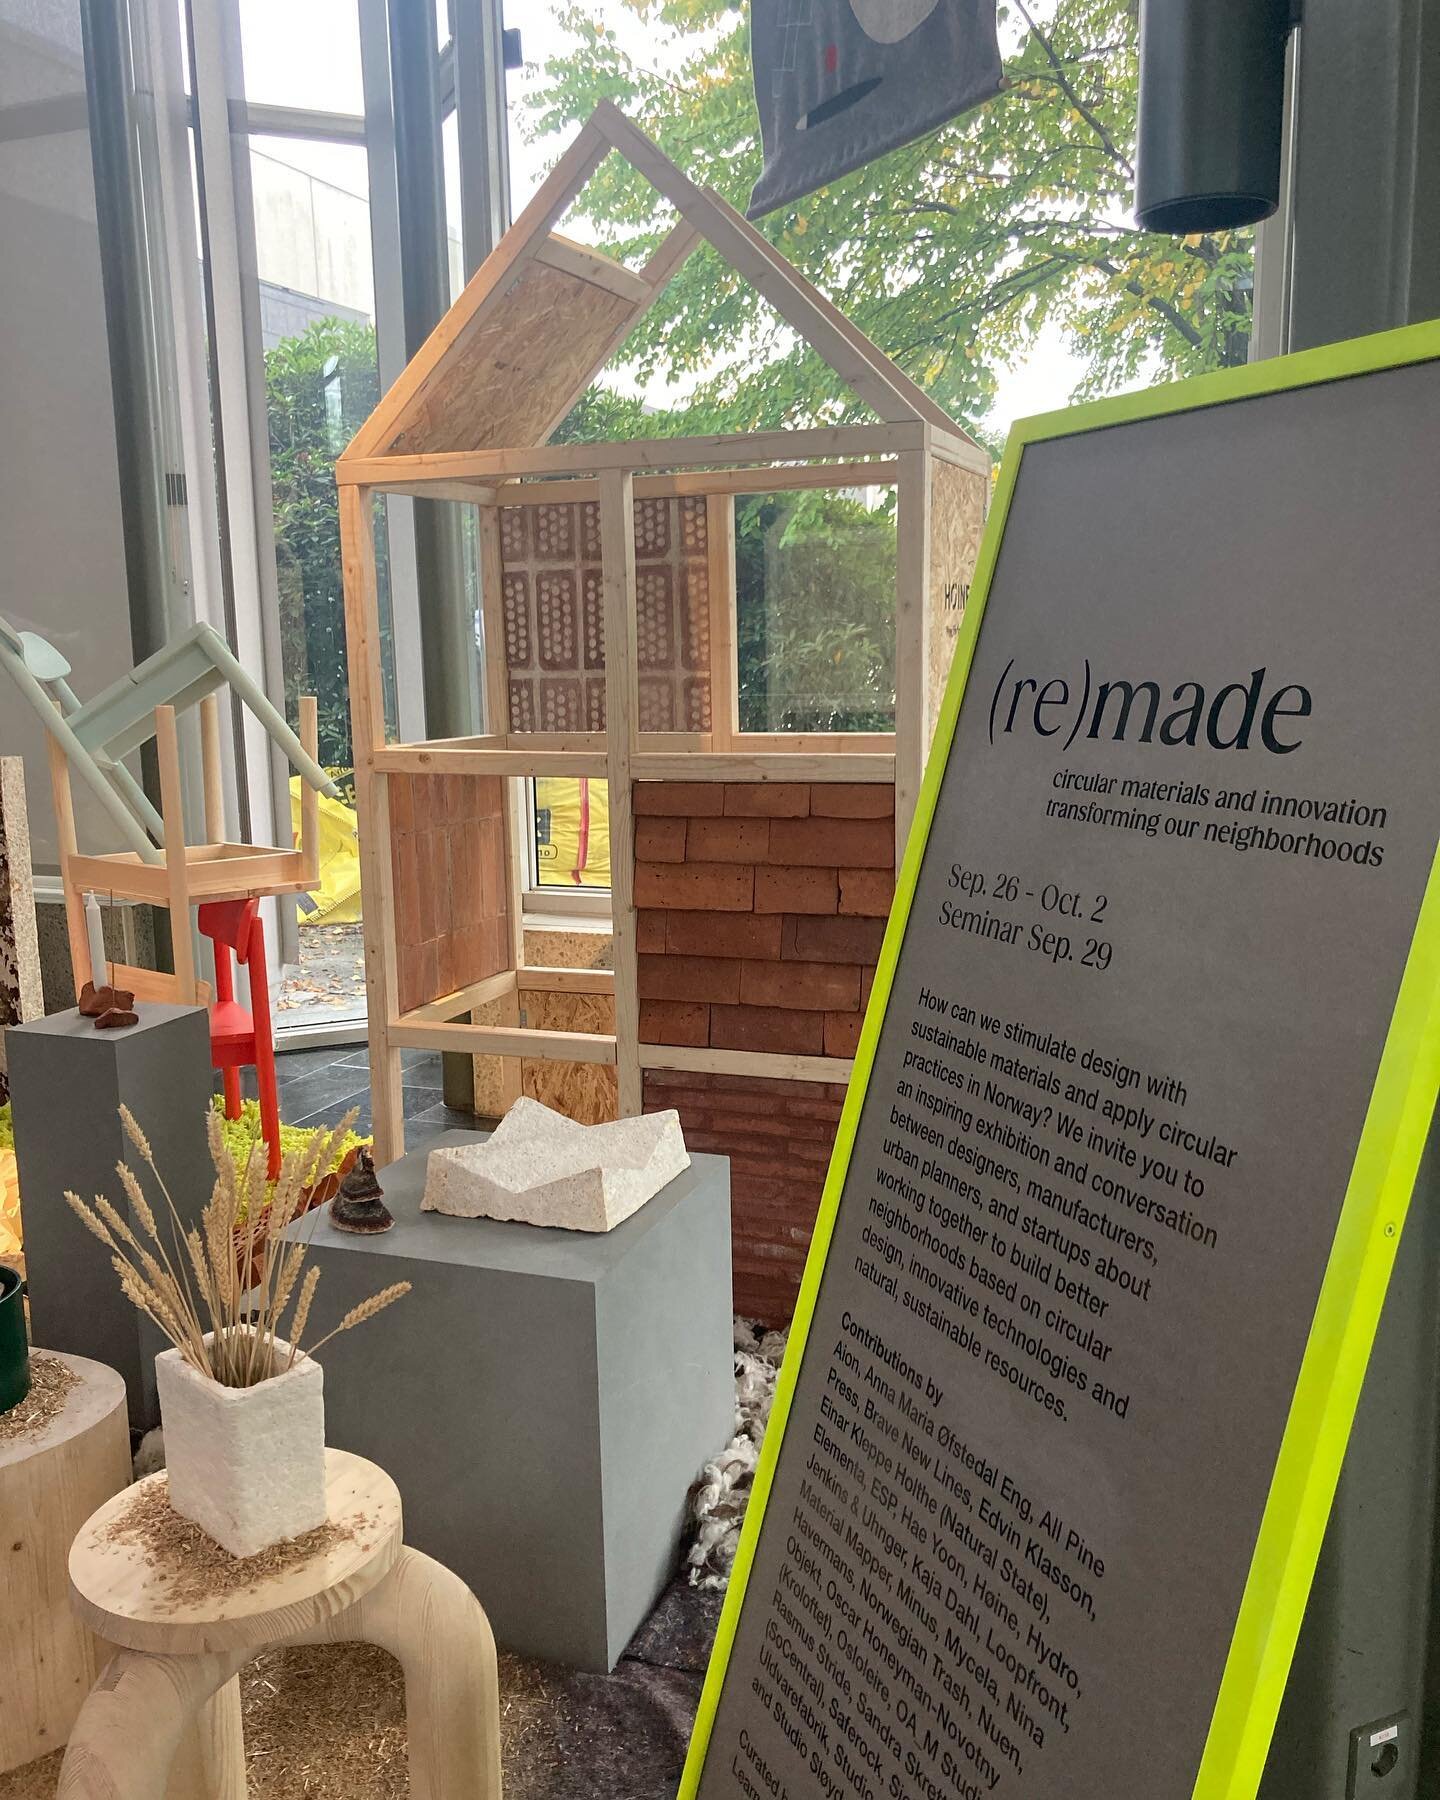 Come see our H&Oslash;INE house, exploring new life for Bricks, making products for interiors, fa&ccedil;ades and roofs.

@novooi.agency 

A part of @oslotriennale and @osloiw
In partnership with @oslobizreg @era.innovation and @kulturradet
 
#sustai